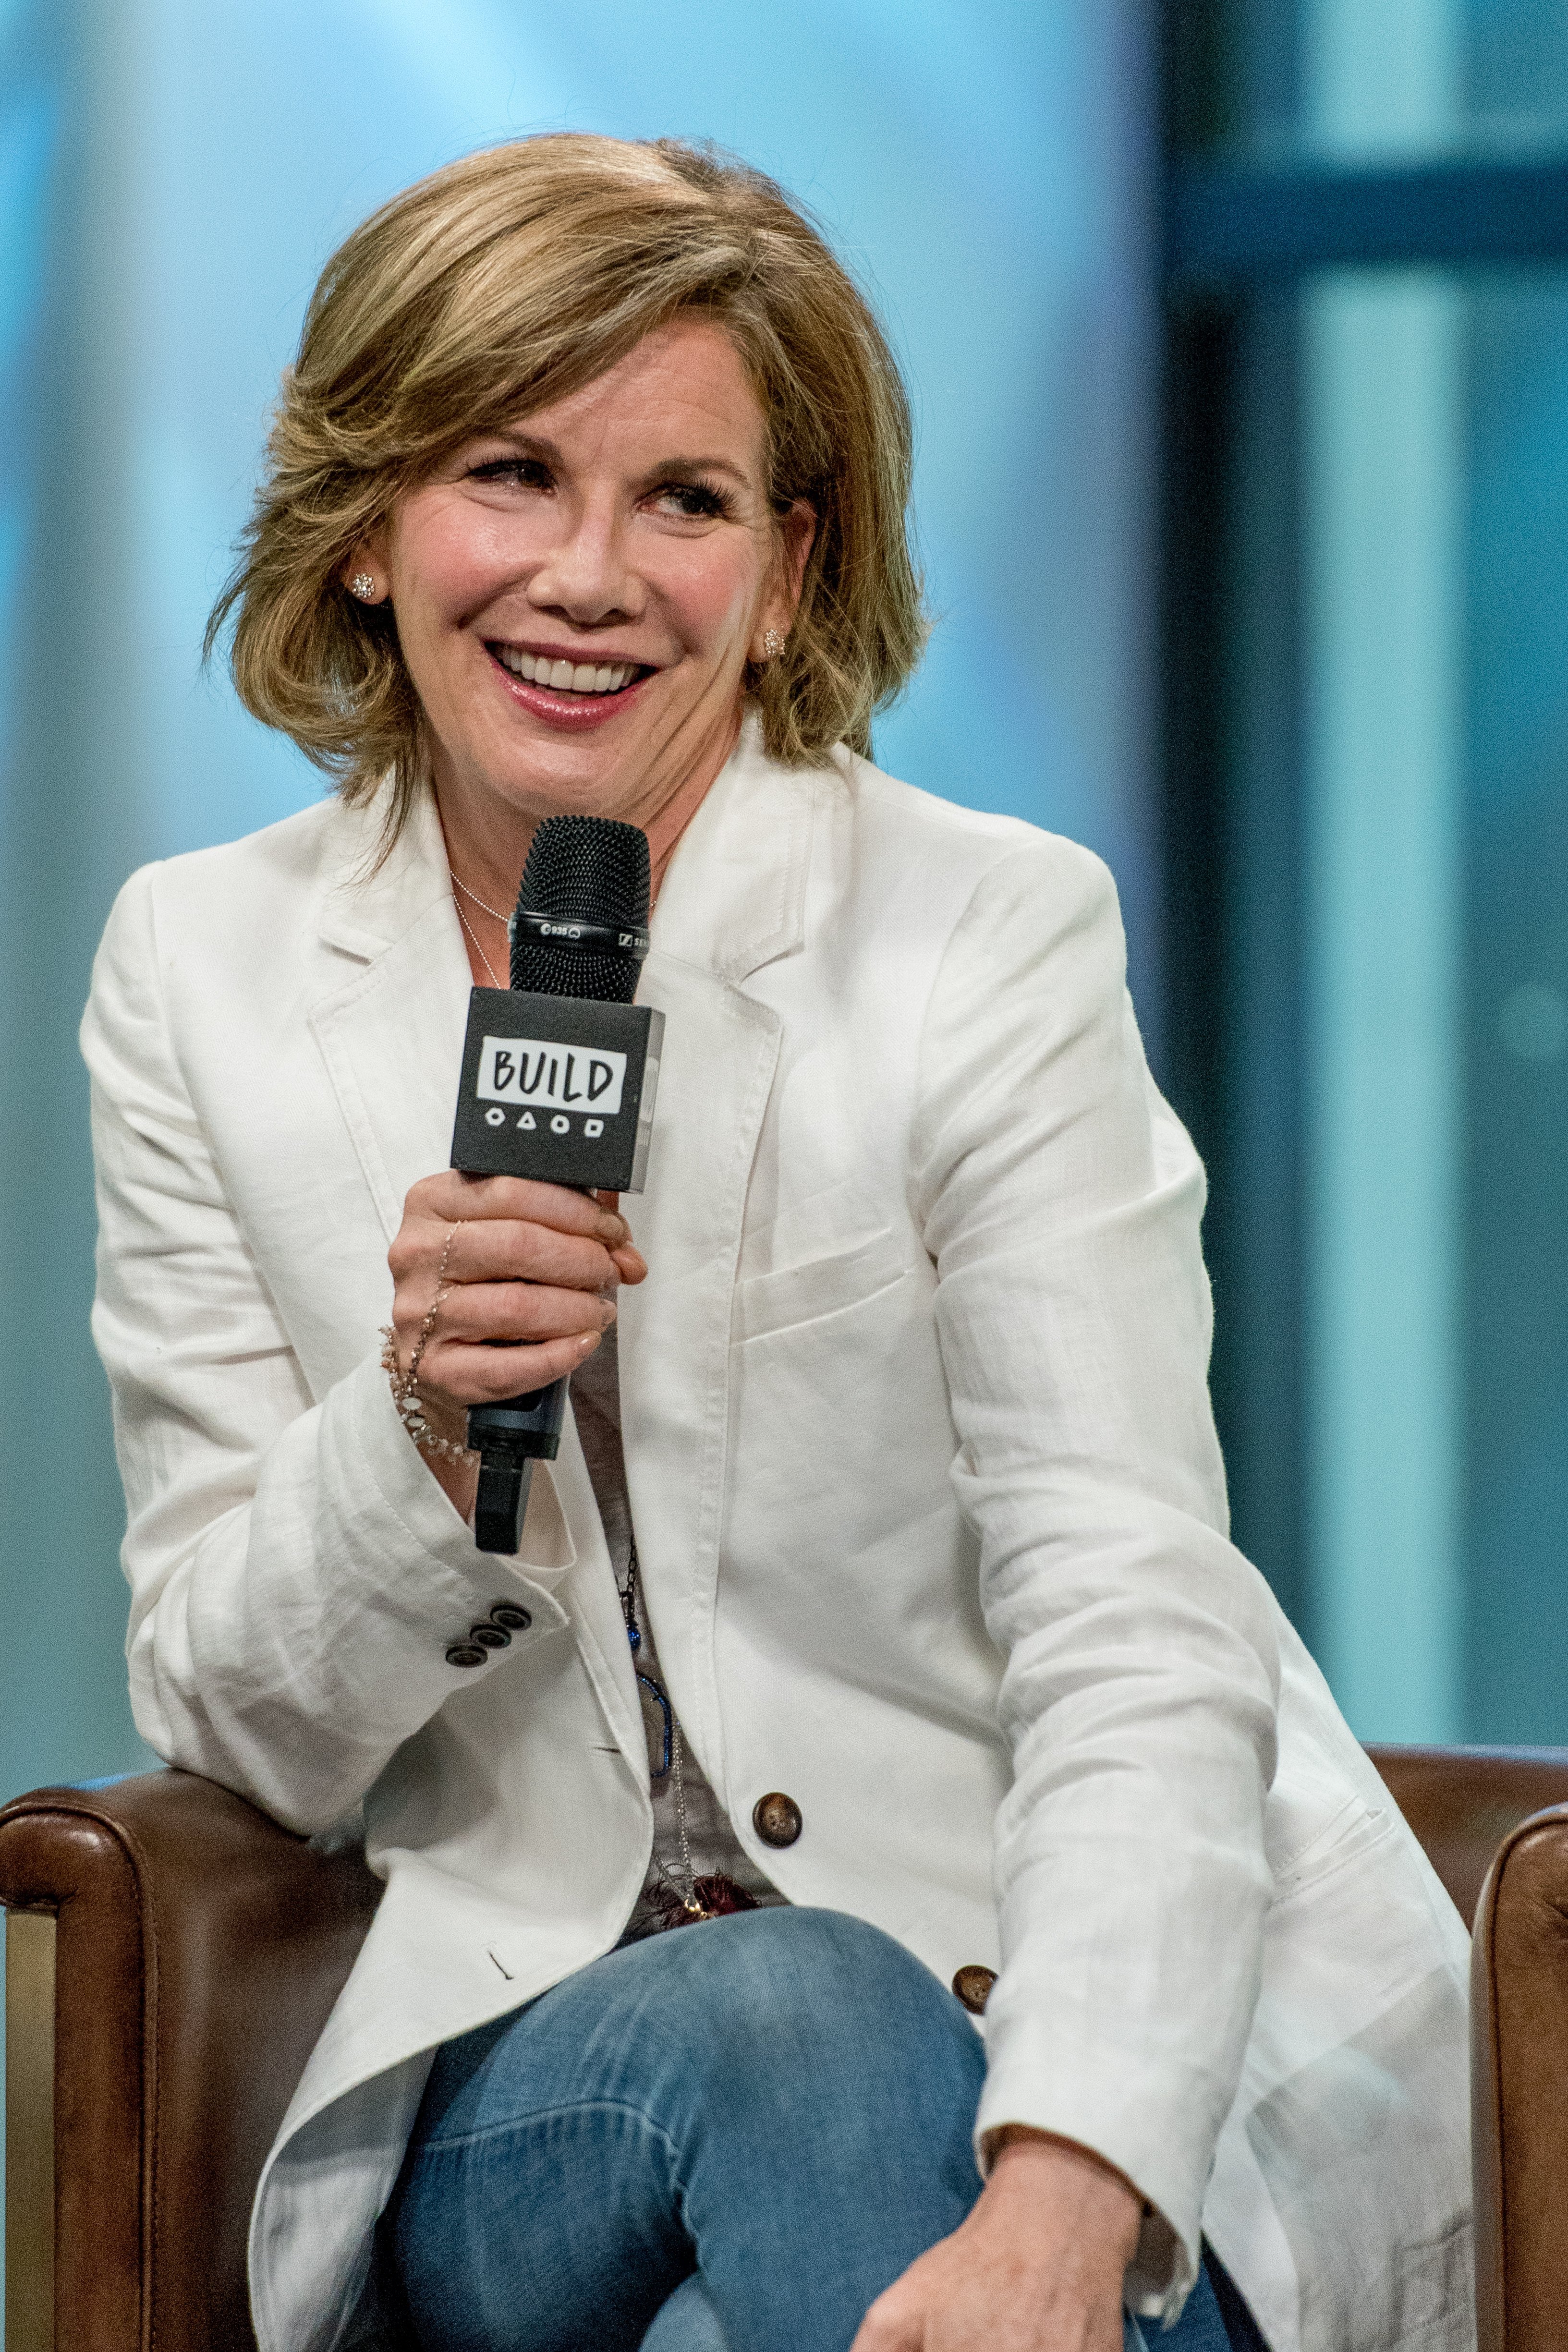 Melissa Gilbert discusses "If Only" with the BuiLd Series at Build Studio on August 14, 2017. | Photo: GettyImages